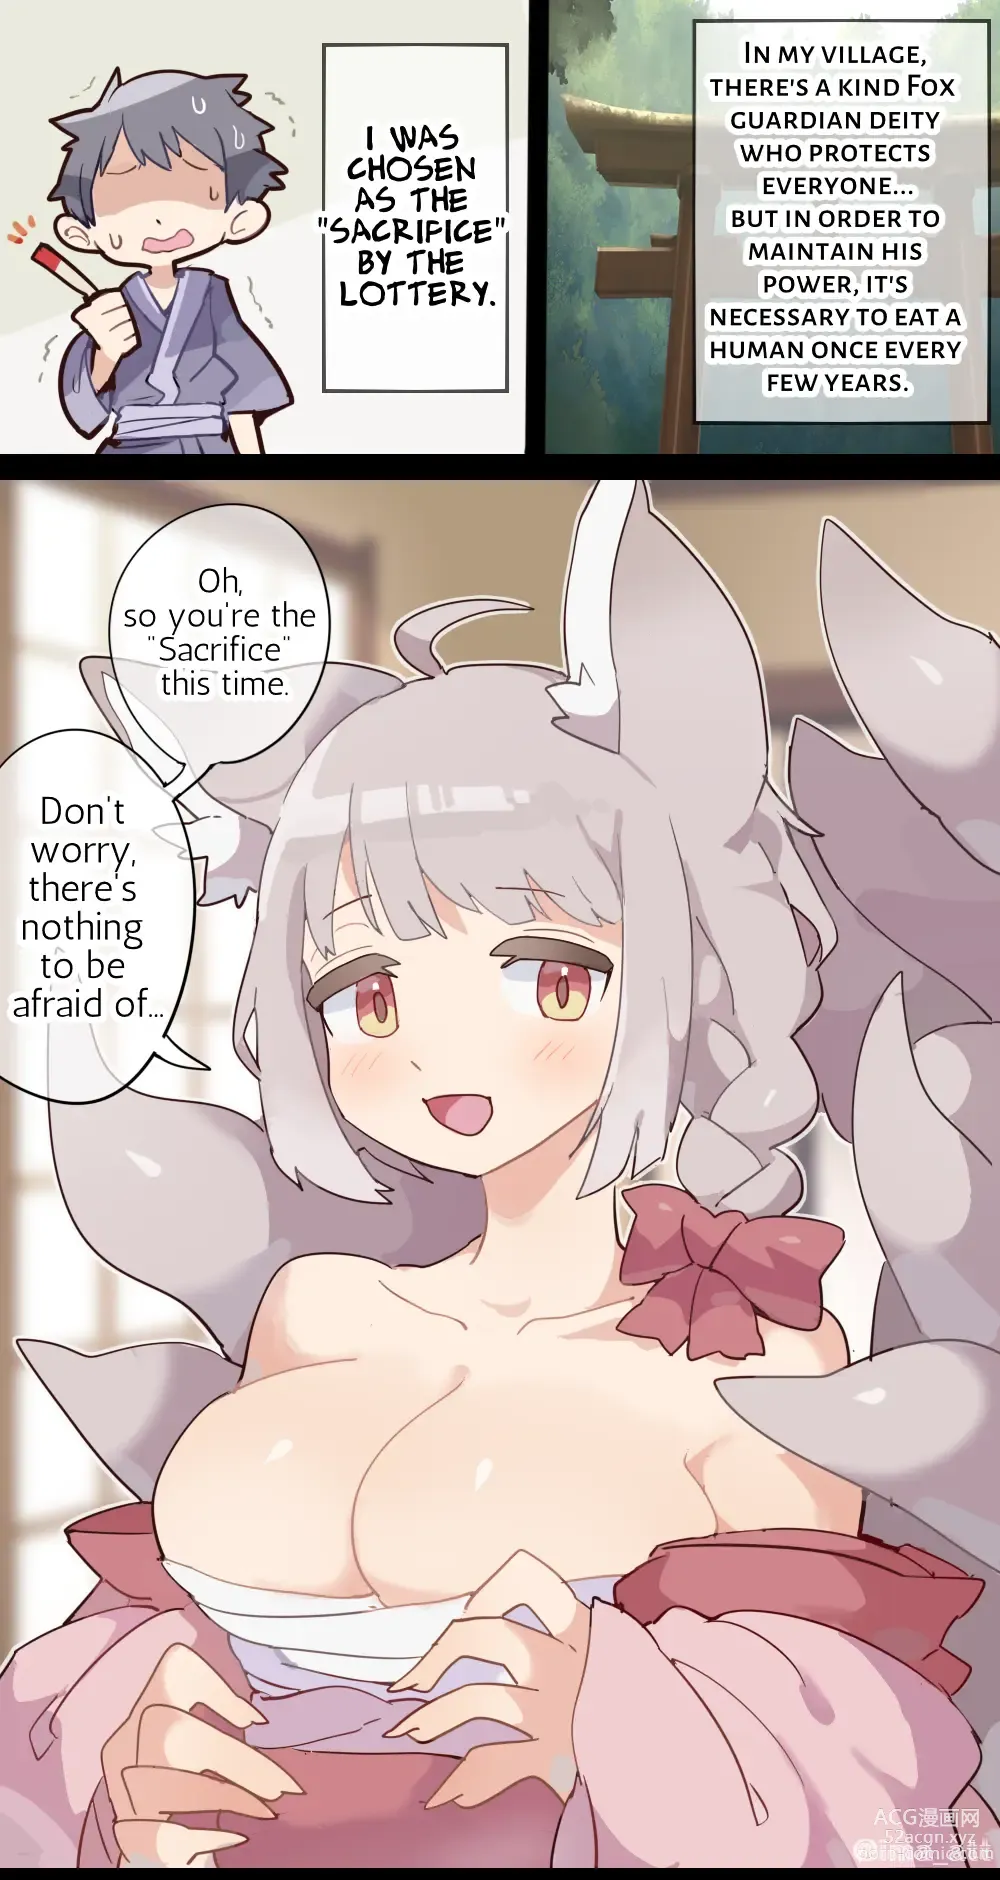 Page 1 of doujinshi Giant Fox Girl VORE